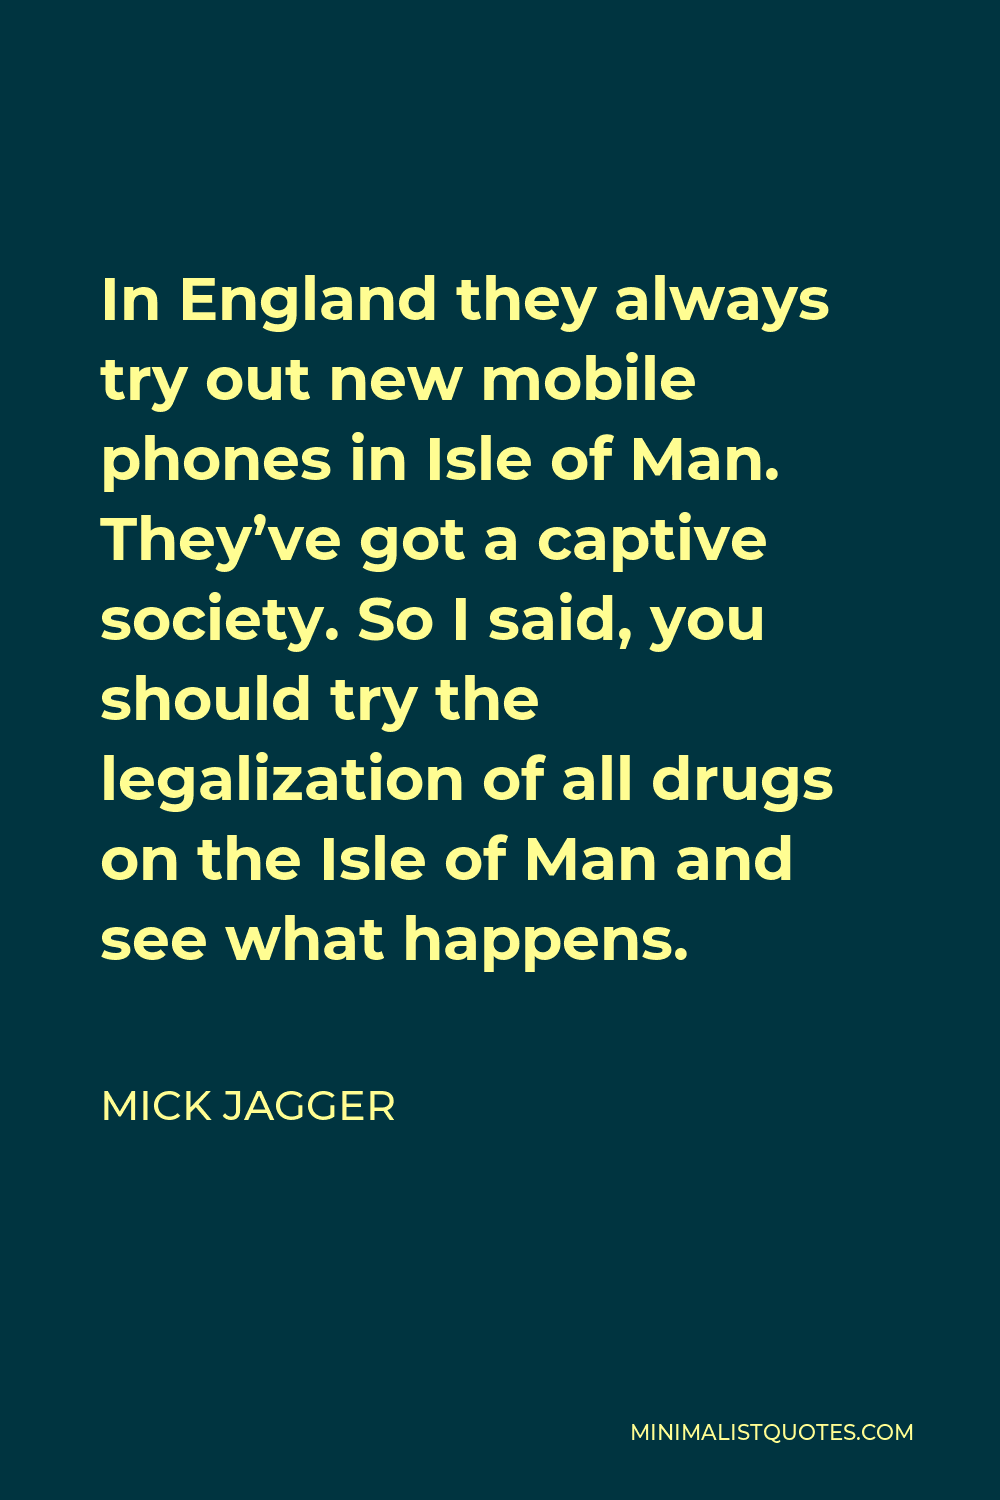 Mick Jagger Quote - In England they always try out new mobile phones in Isle of Man. They’ve got a captive society. So I said, you should try the legalization of all drugs on the Isle of Man and see what happens.